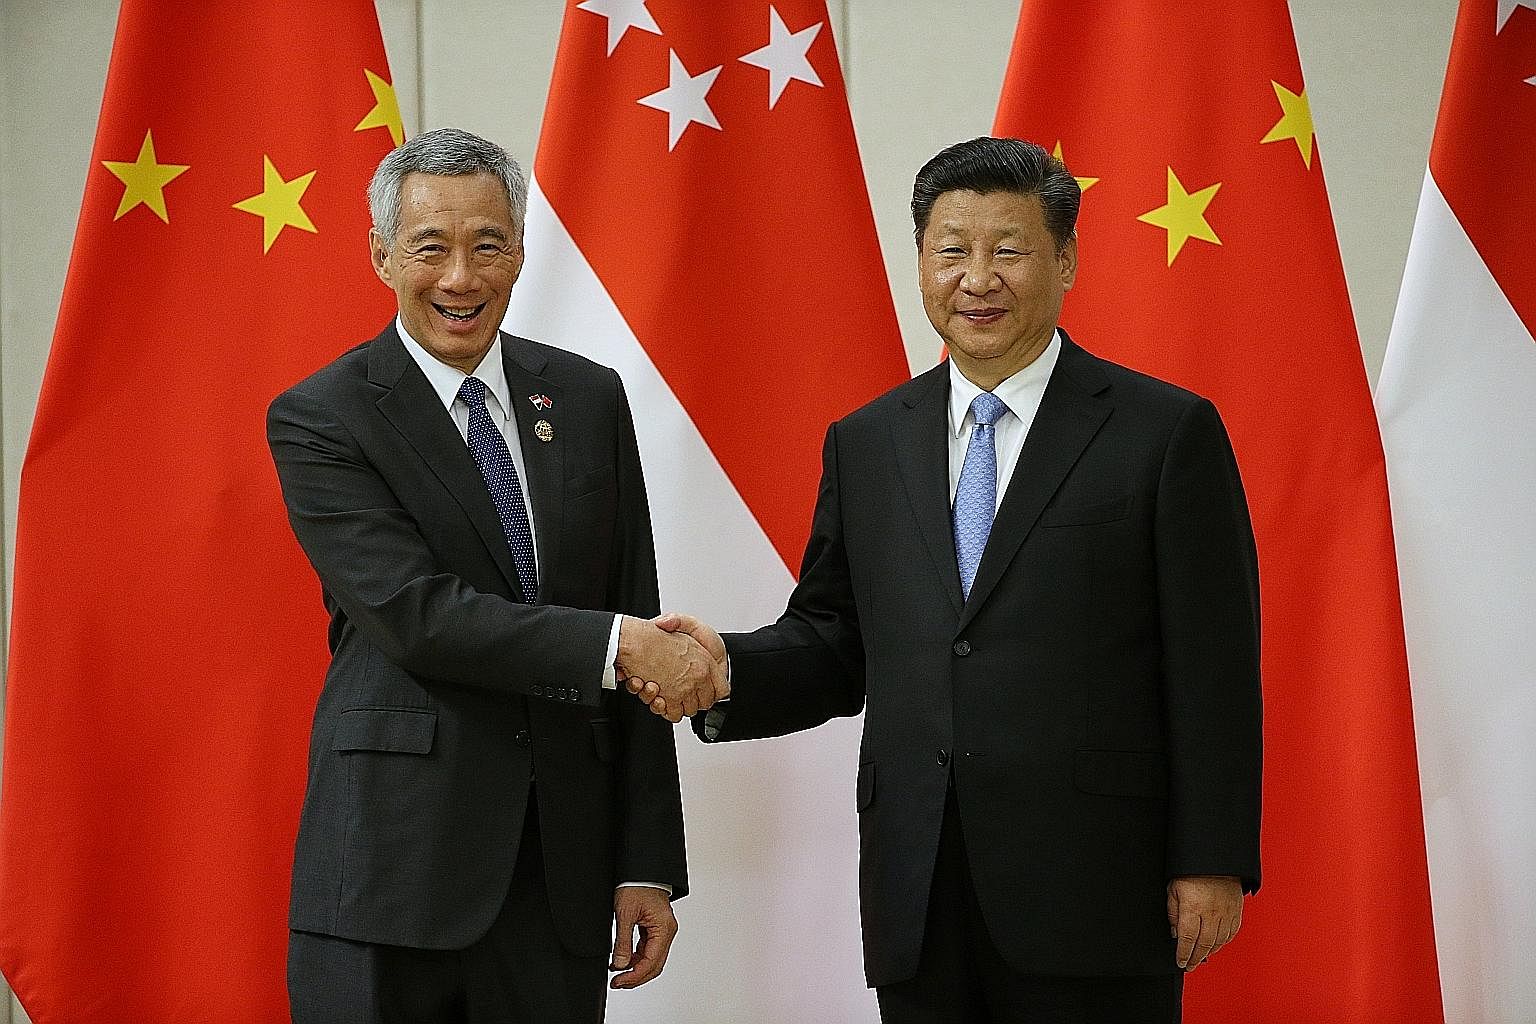 Prime Minister Lee Hsien Loong with Chinese President Xi Jinping at the Boao Forum on Tuesday. Mr Lee says in his speech that China's role in the international economy will grow larger. This has shifted the overall strategic balance. It has also rais